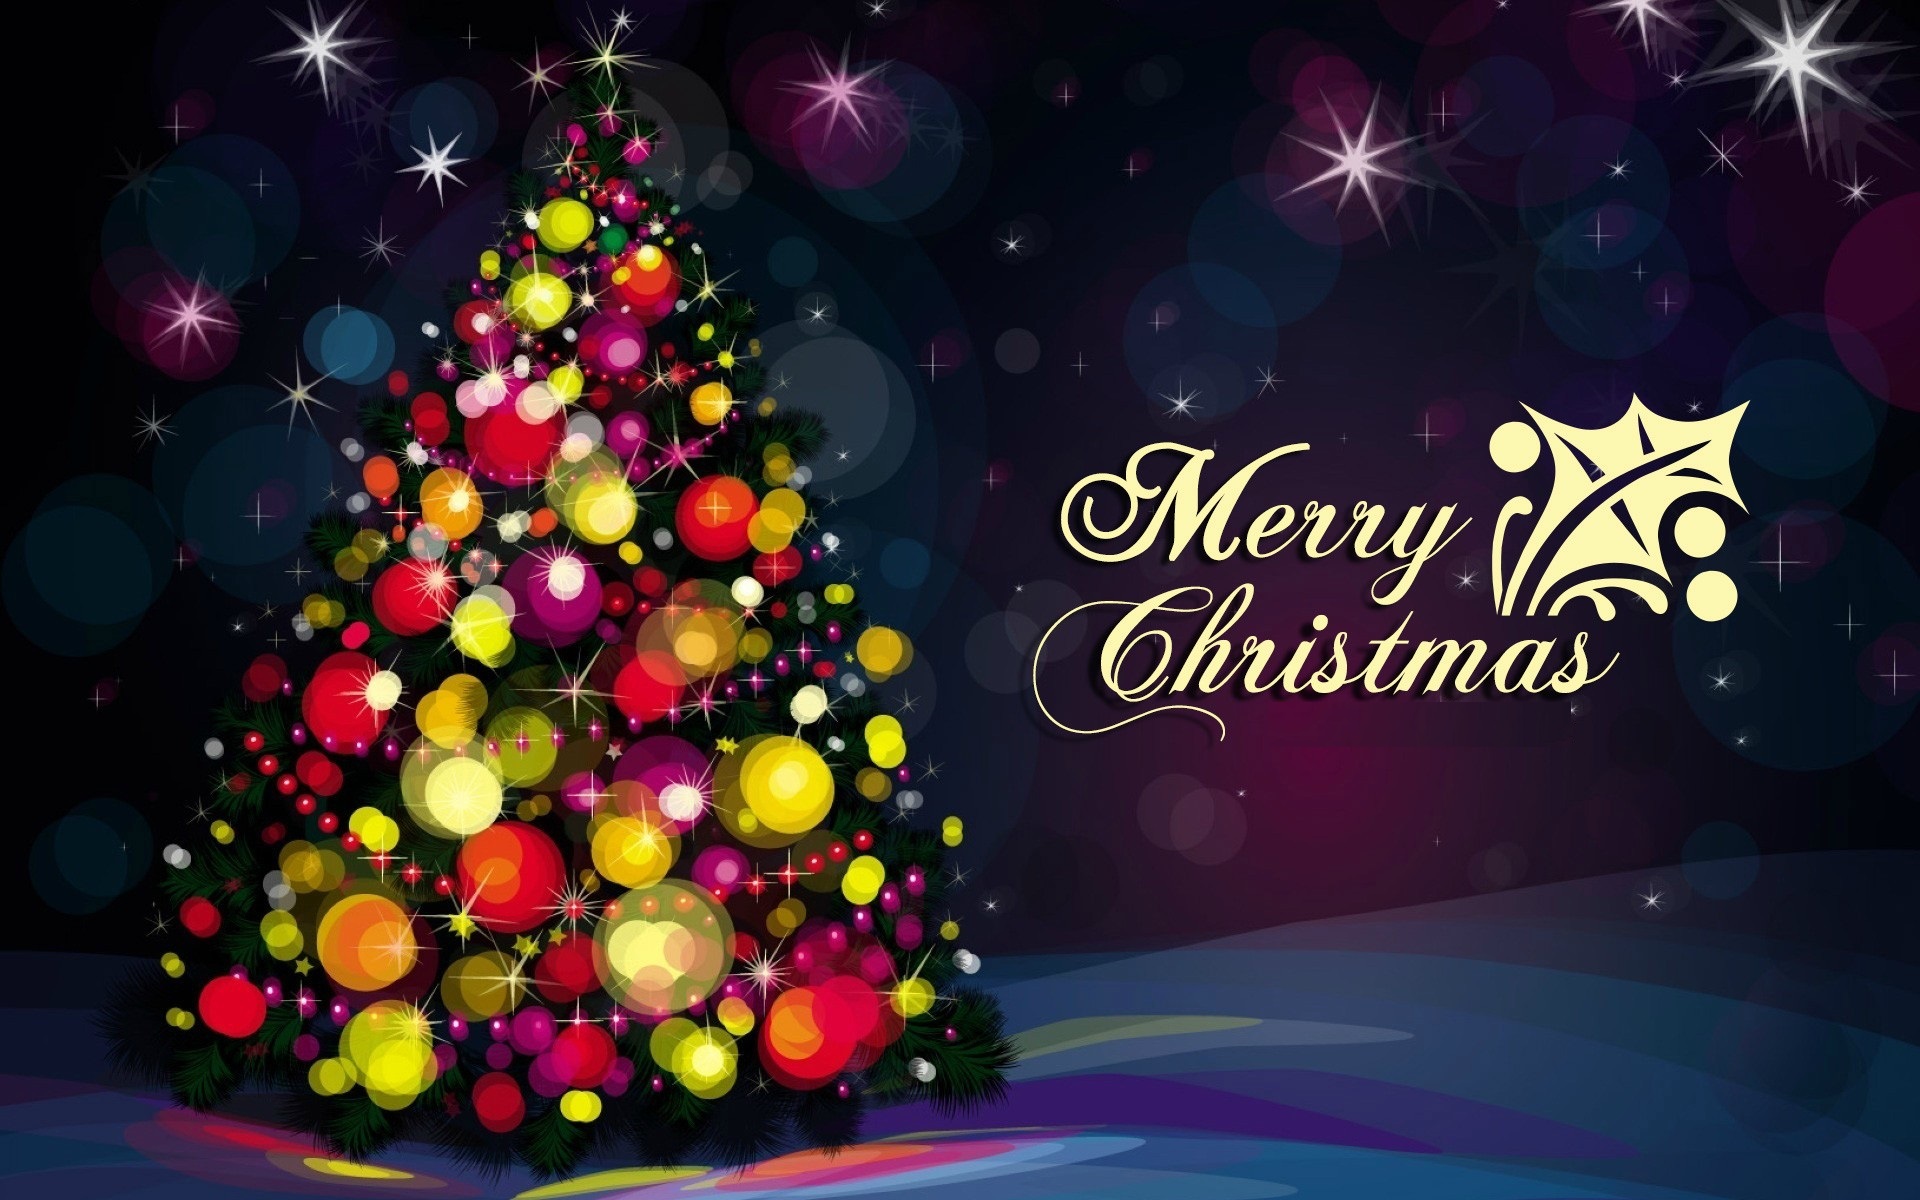 Merry Christmas Free Hd Wallpapers Let Us Publish